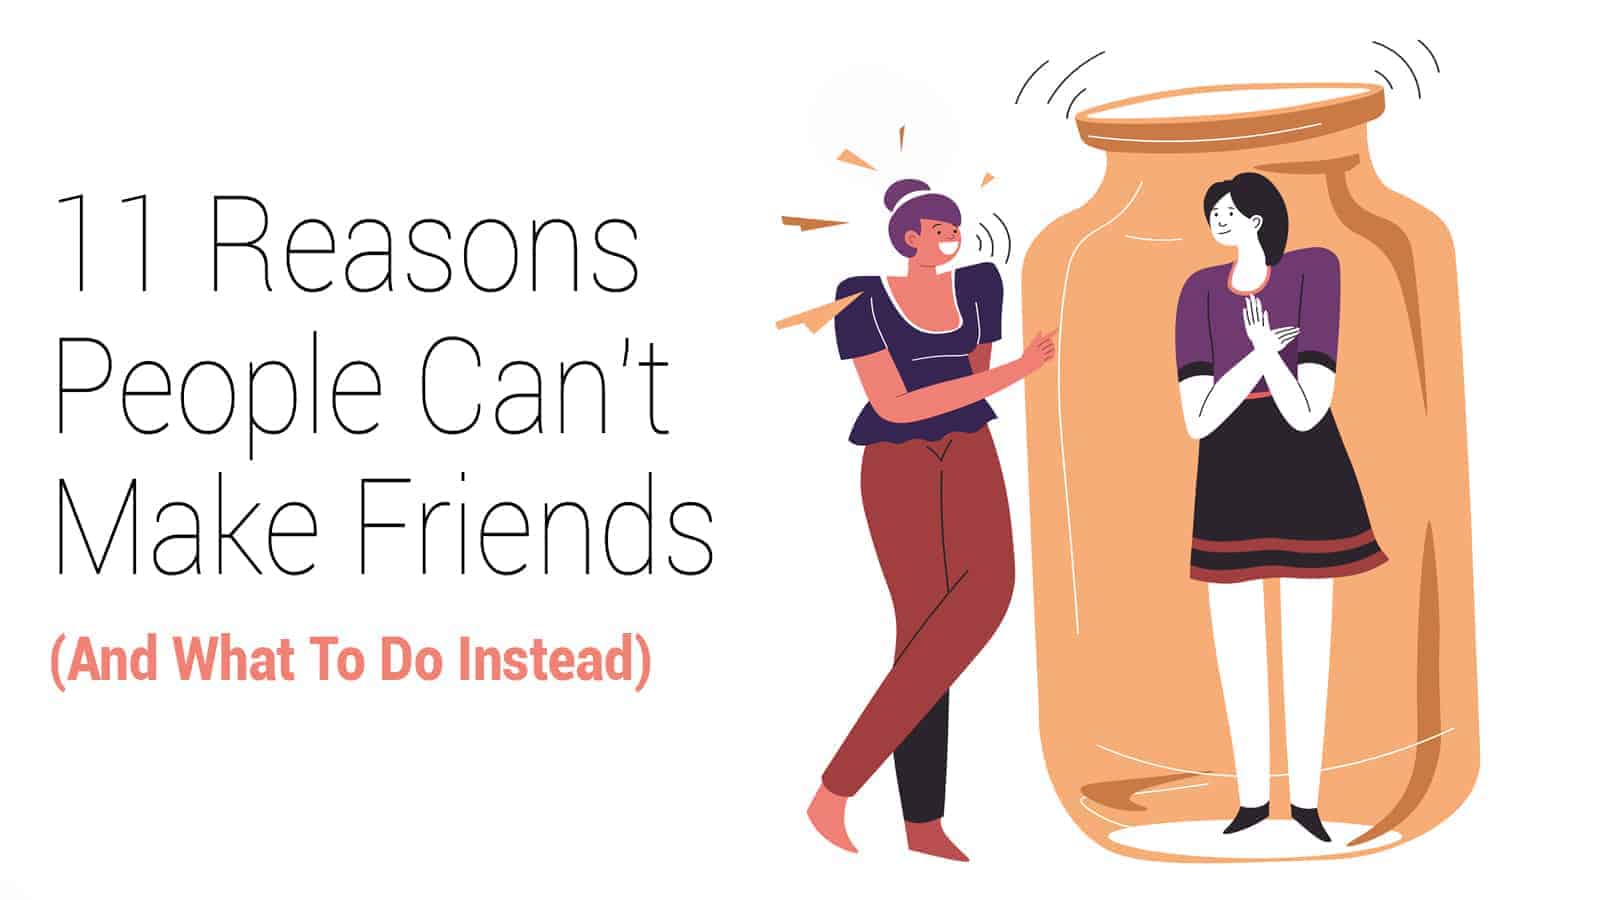 11 Reasons People Can’t Make Friends (And What To Do Instead)